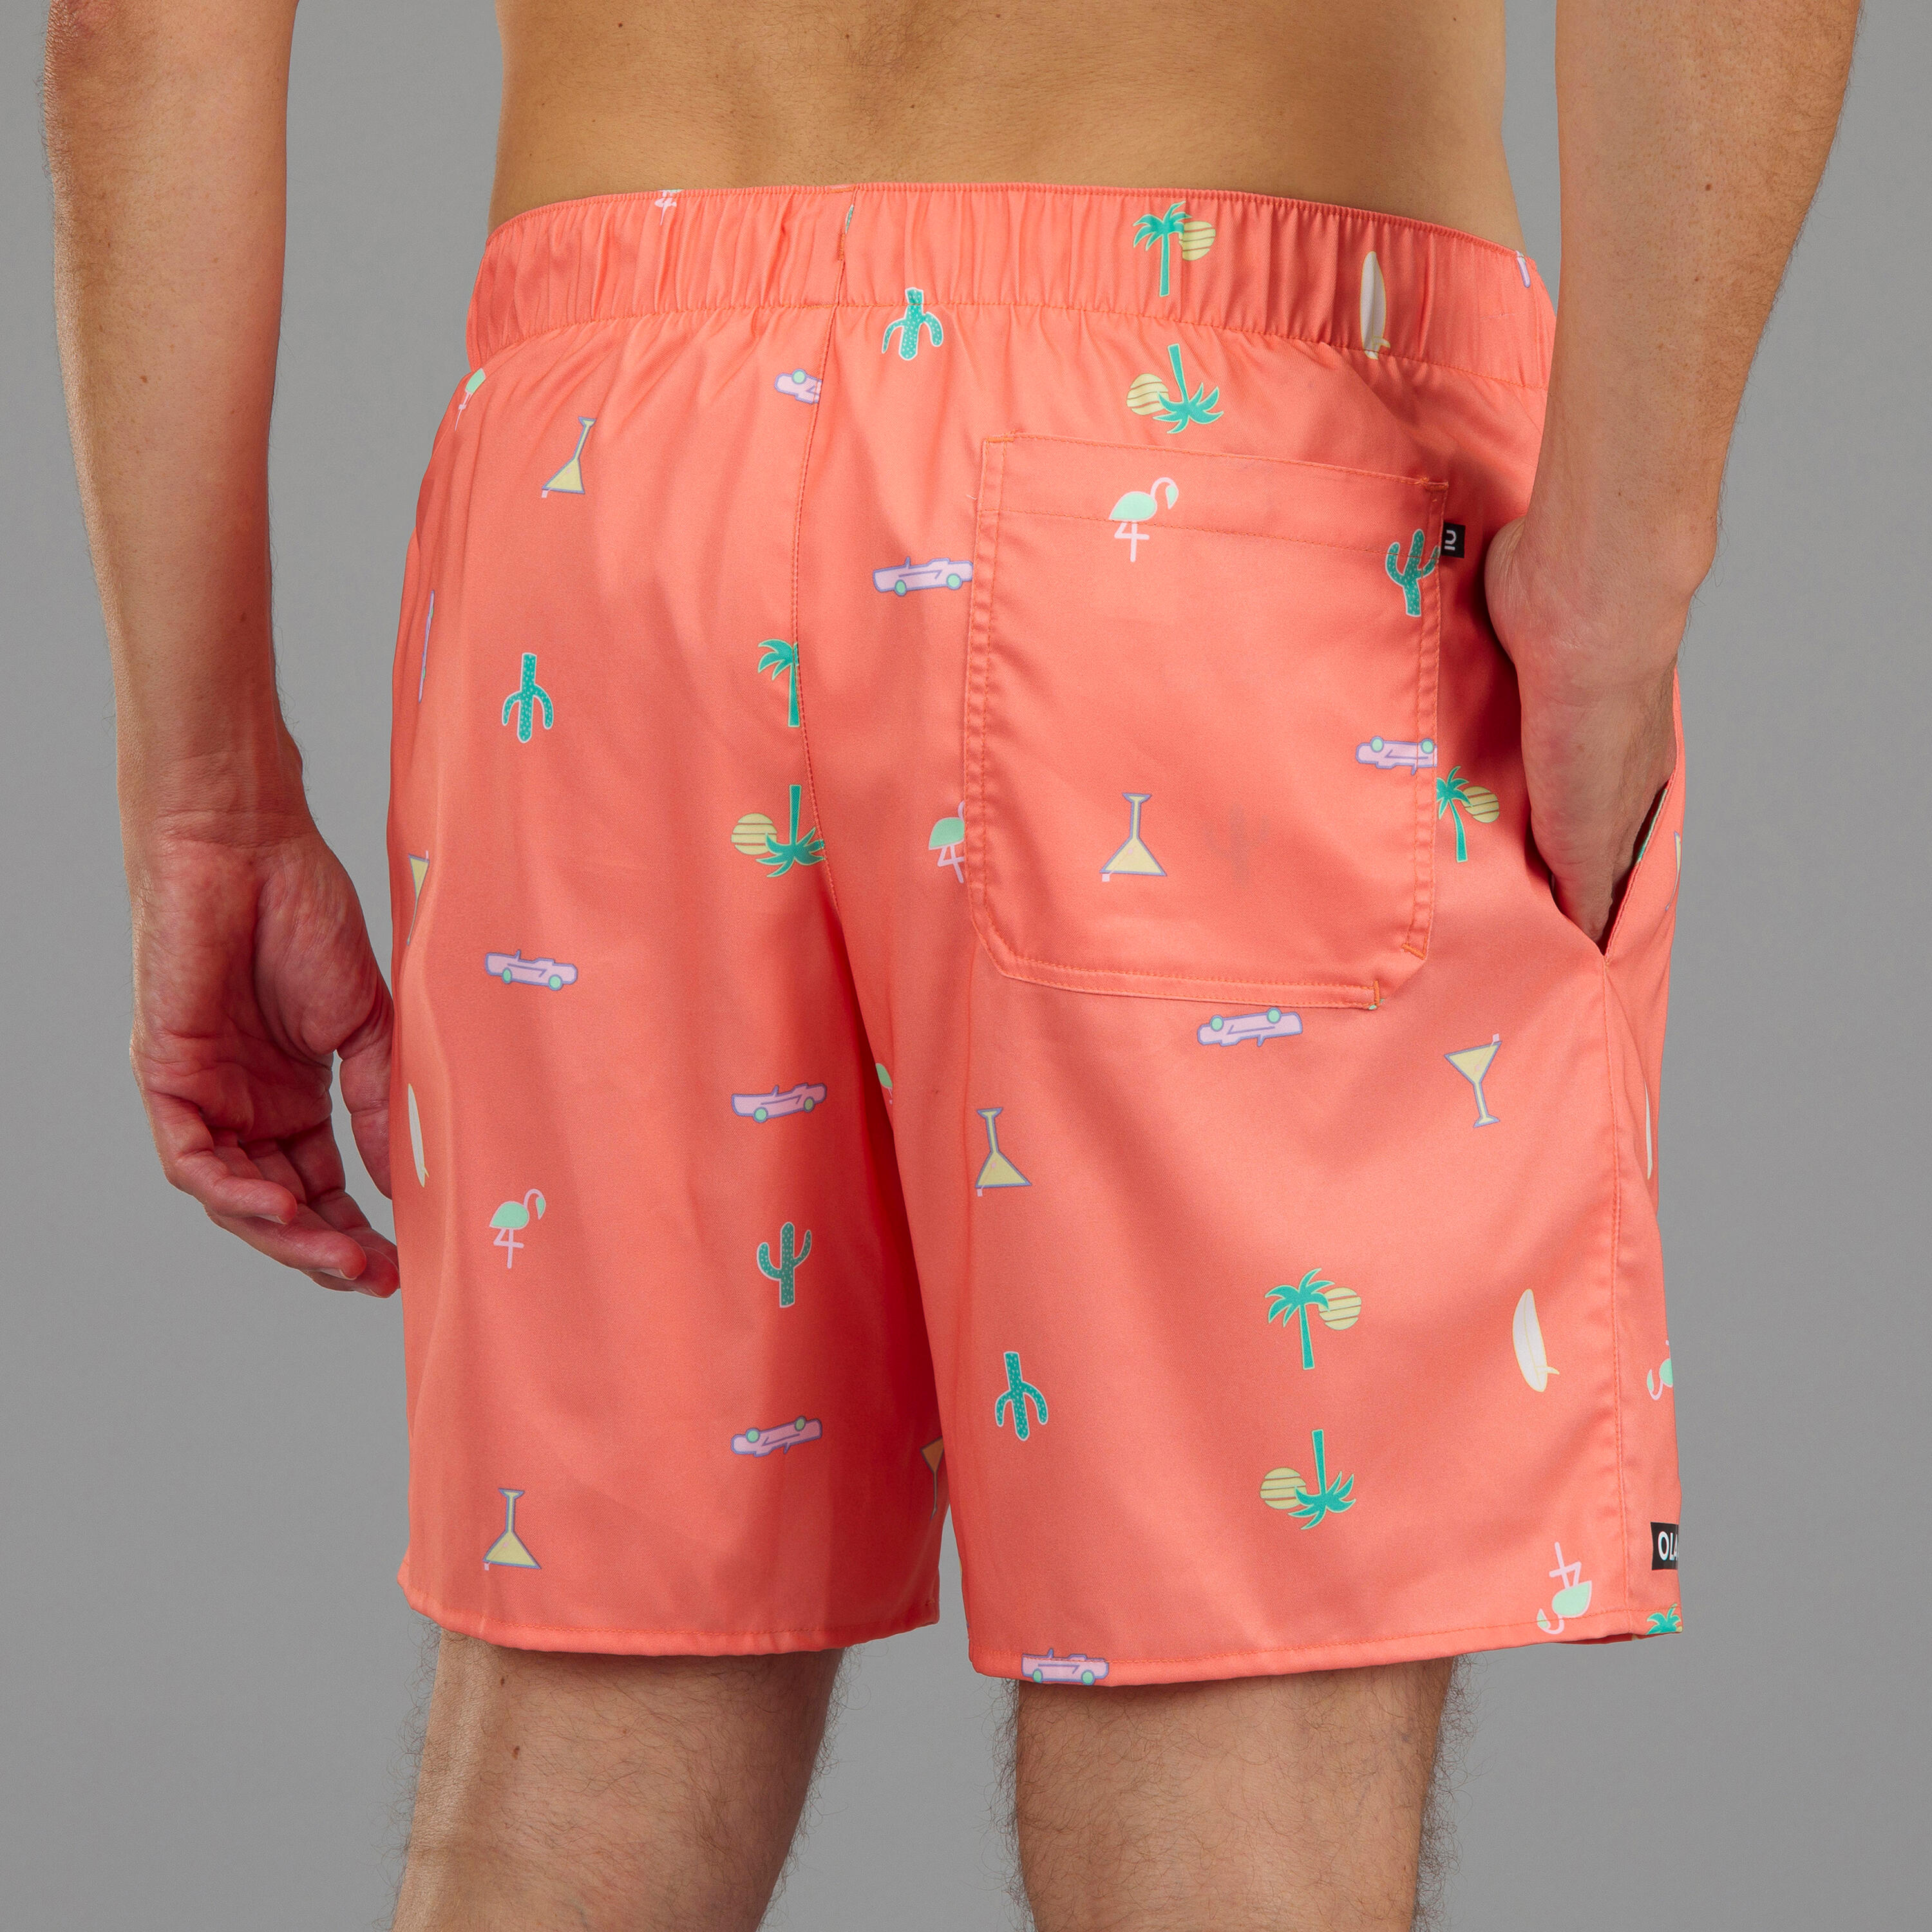 Surfing Standard Boardshorts 100 - COSMIC CORAL 5/7